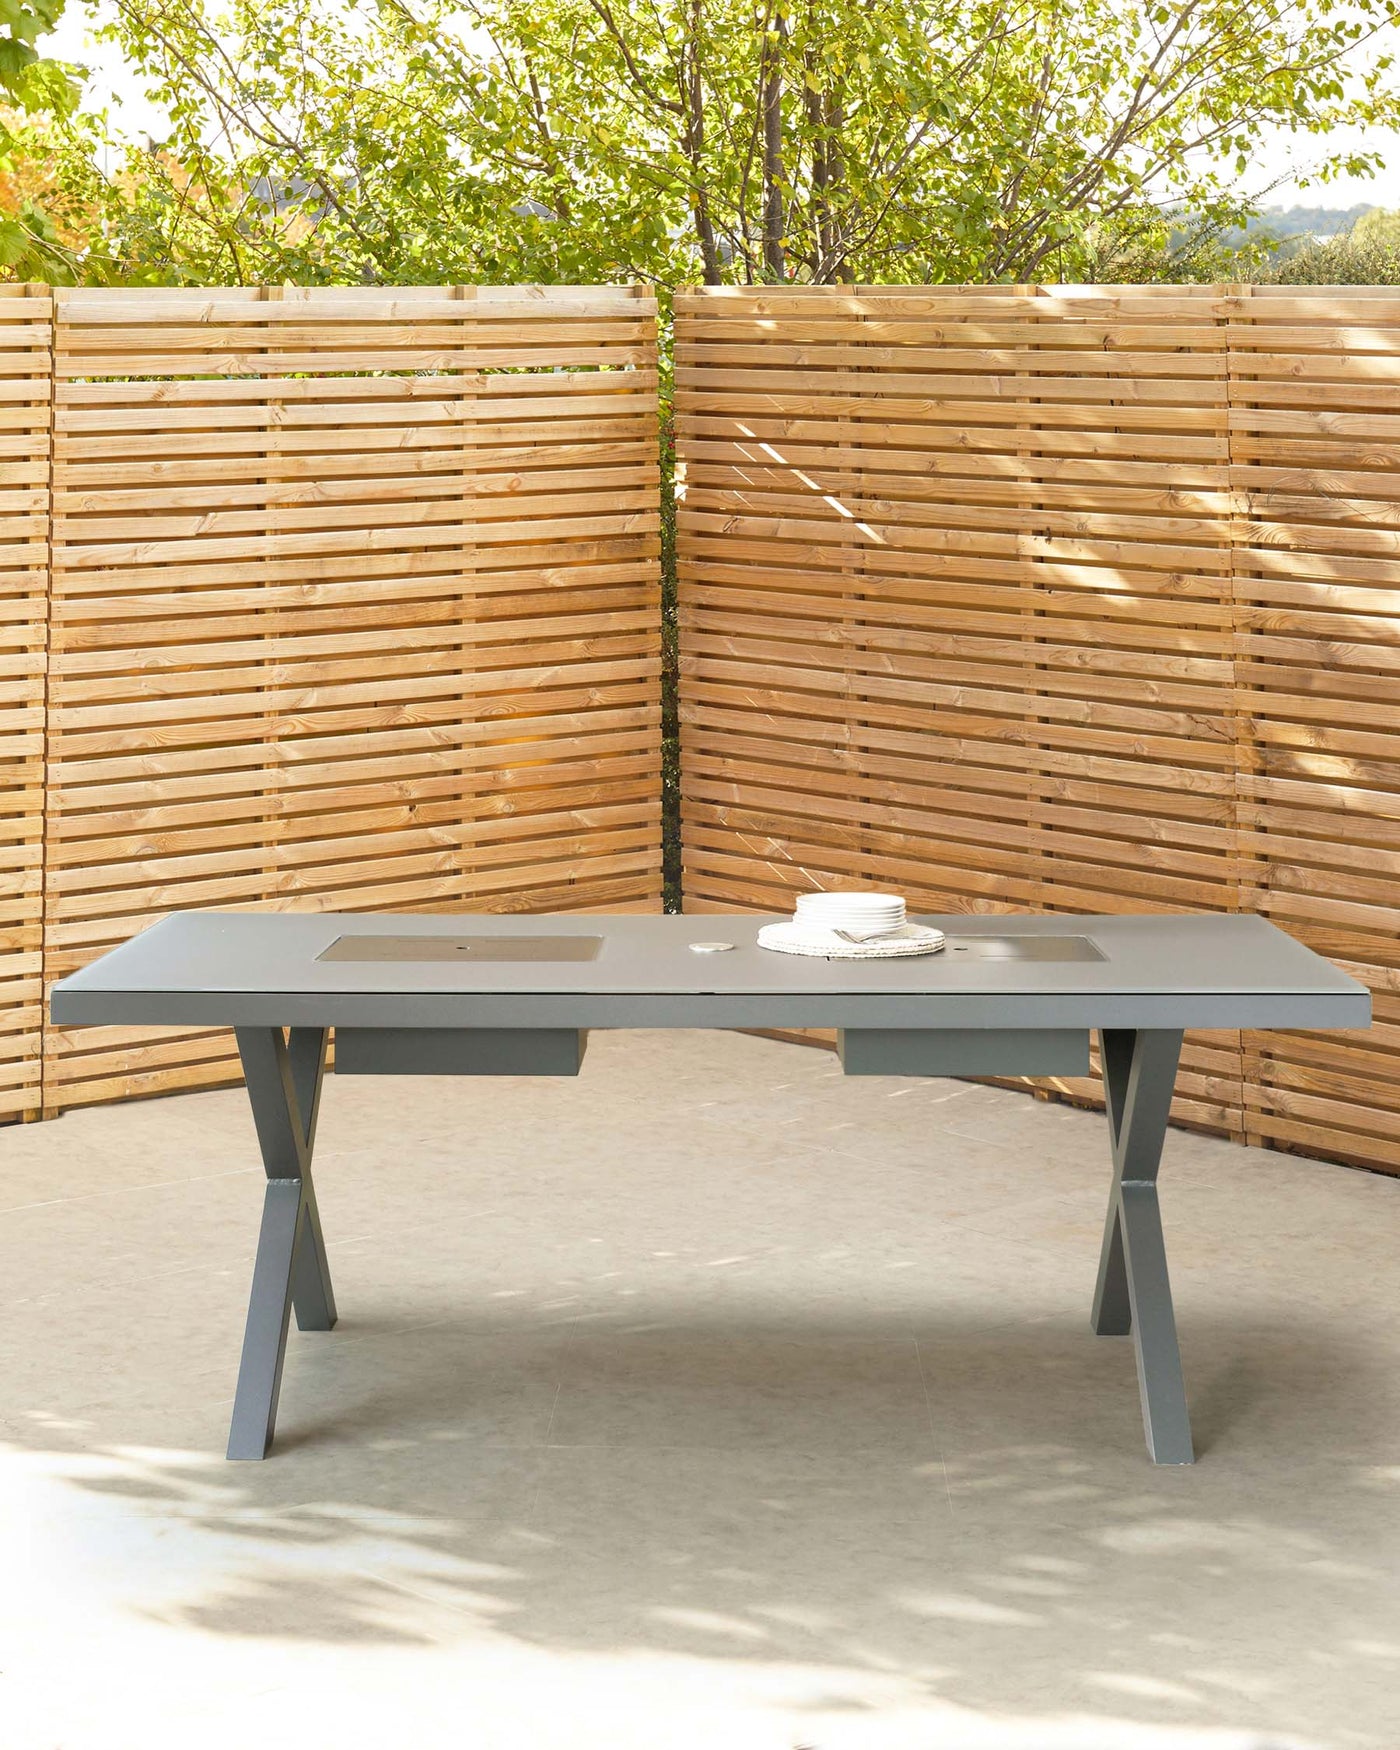 Modern outdoor rectangular dining table with a sleek grey finish, featuring angled legs for stability and a central cutout serving tray design. The table is set against a backdrop of wooden slatted fencing and lush greenery.